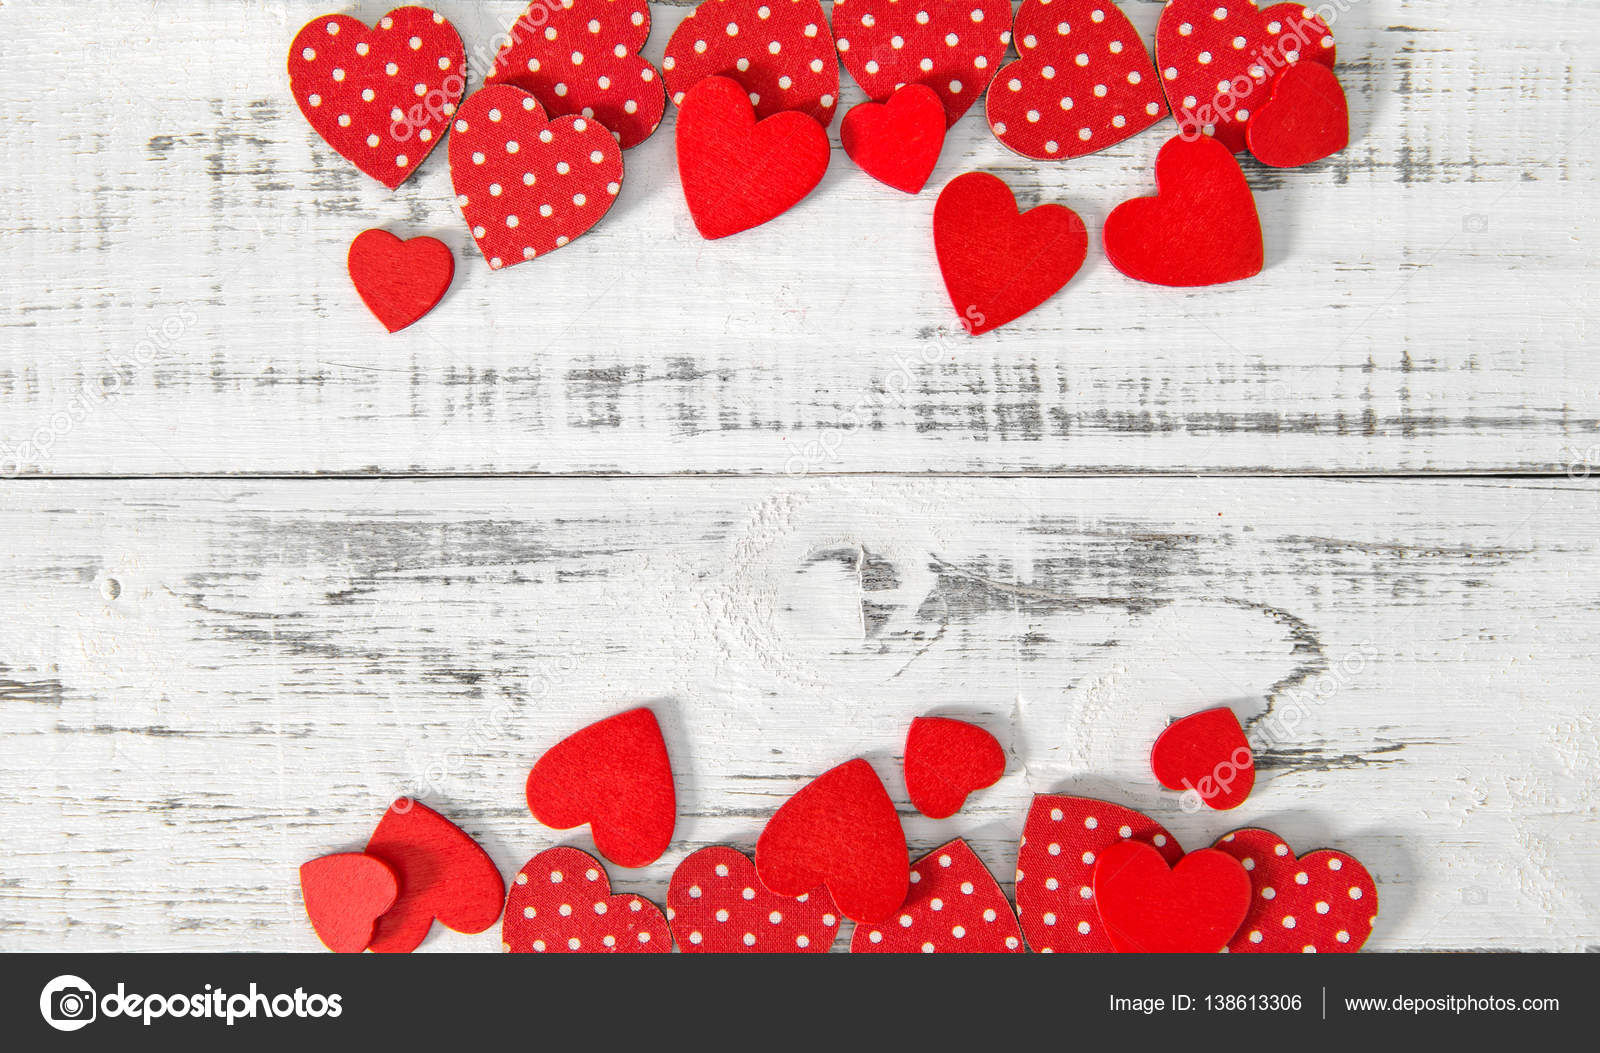 wallpaper dia dos namorados,red,heart,valentine's day,text,love